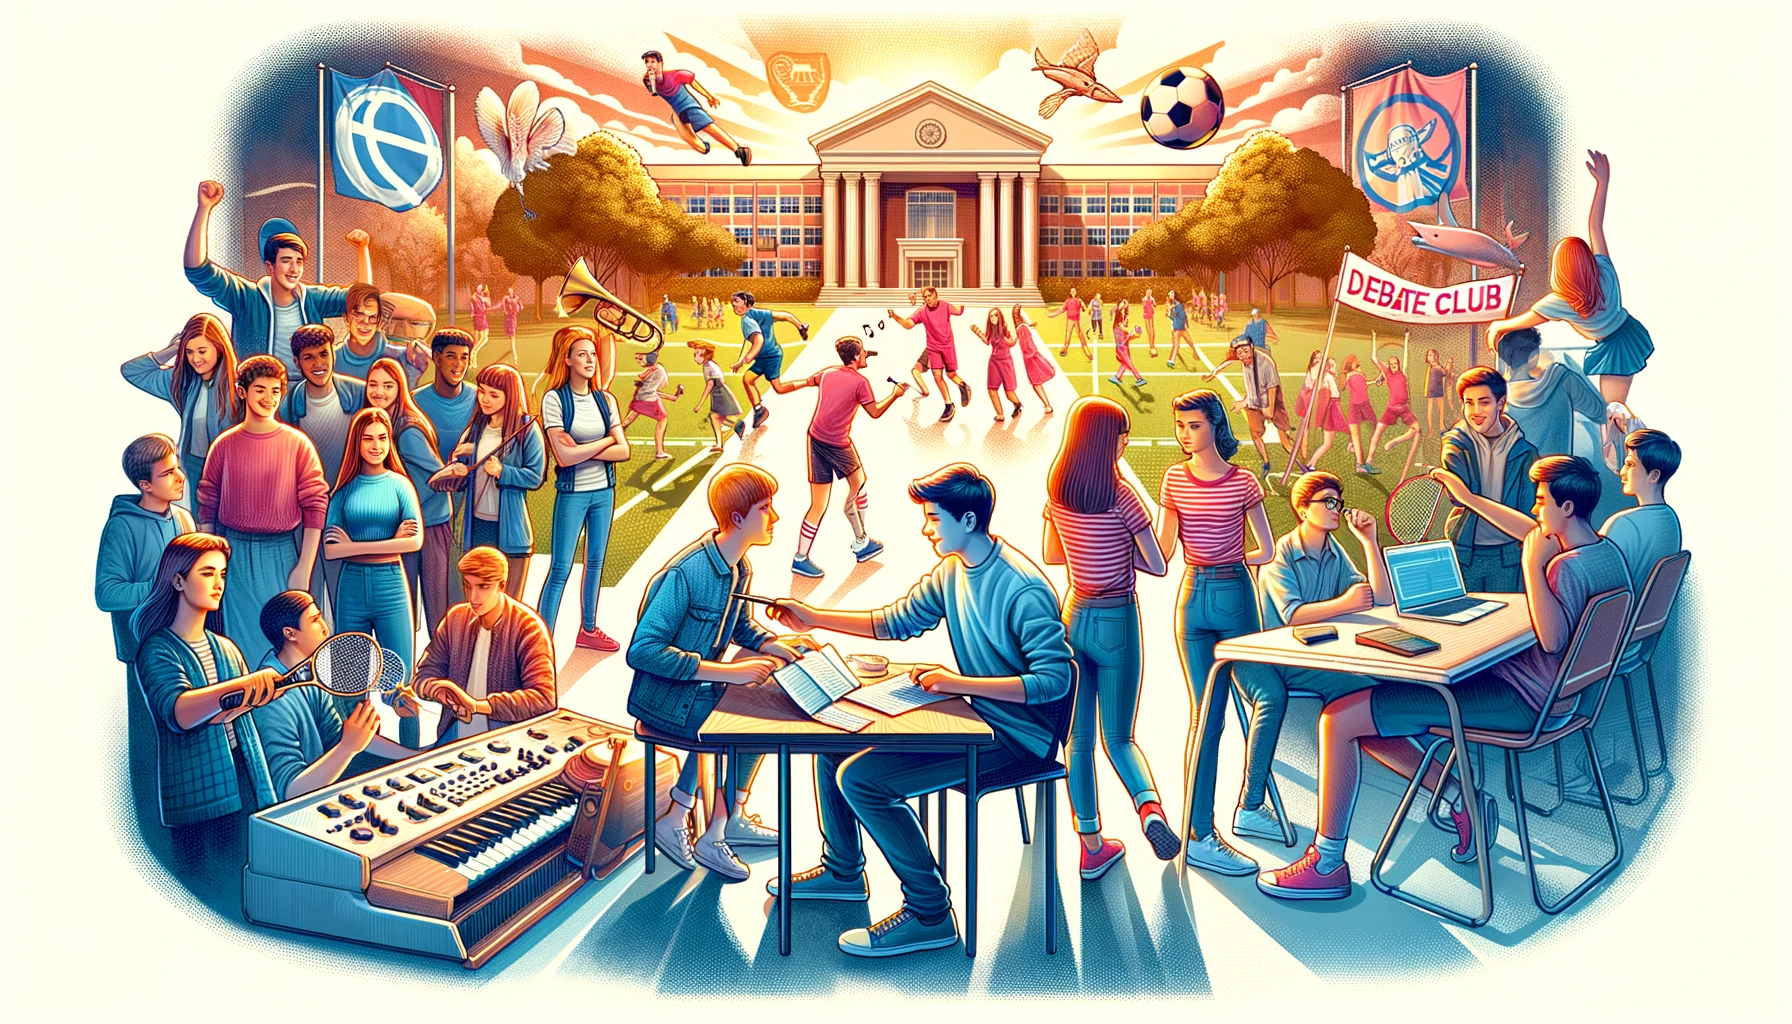 An energetic and vibrant scene of university life focused on club activities and student engagement. The image showcases a dynamic campus environment where diverse groups of students are involved in various clubs. There are students practicing musical instruments, others participating in a dance rehearsal, and some engaged in a debate club meeting. Outdoor scenes include students in sports gear playing soccer and tennis. The background features the university's lush campus with students walking and chatting, highlighting a lively, active student life that promotes personal growth and teamwork.